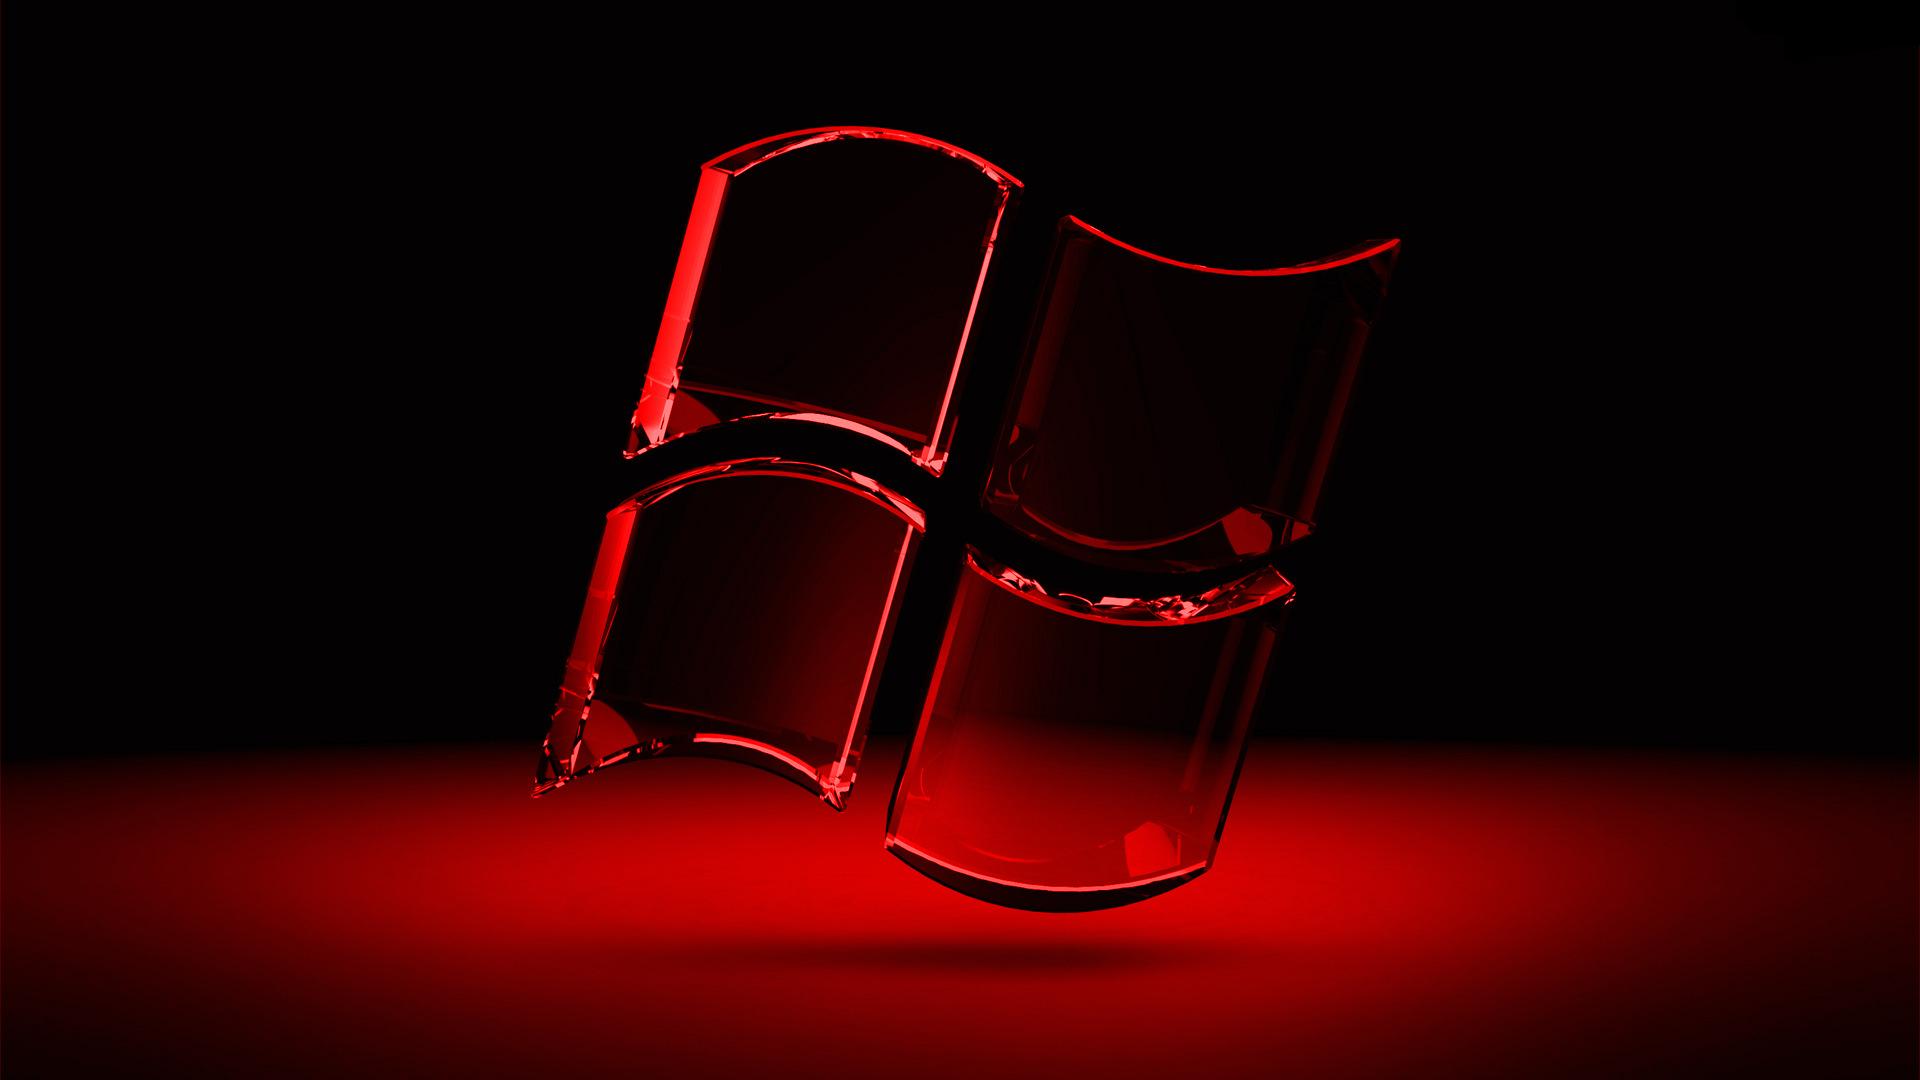 3d Wallpaper Black And Red Image Num 39